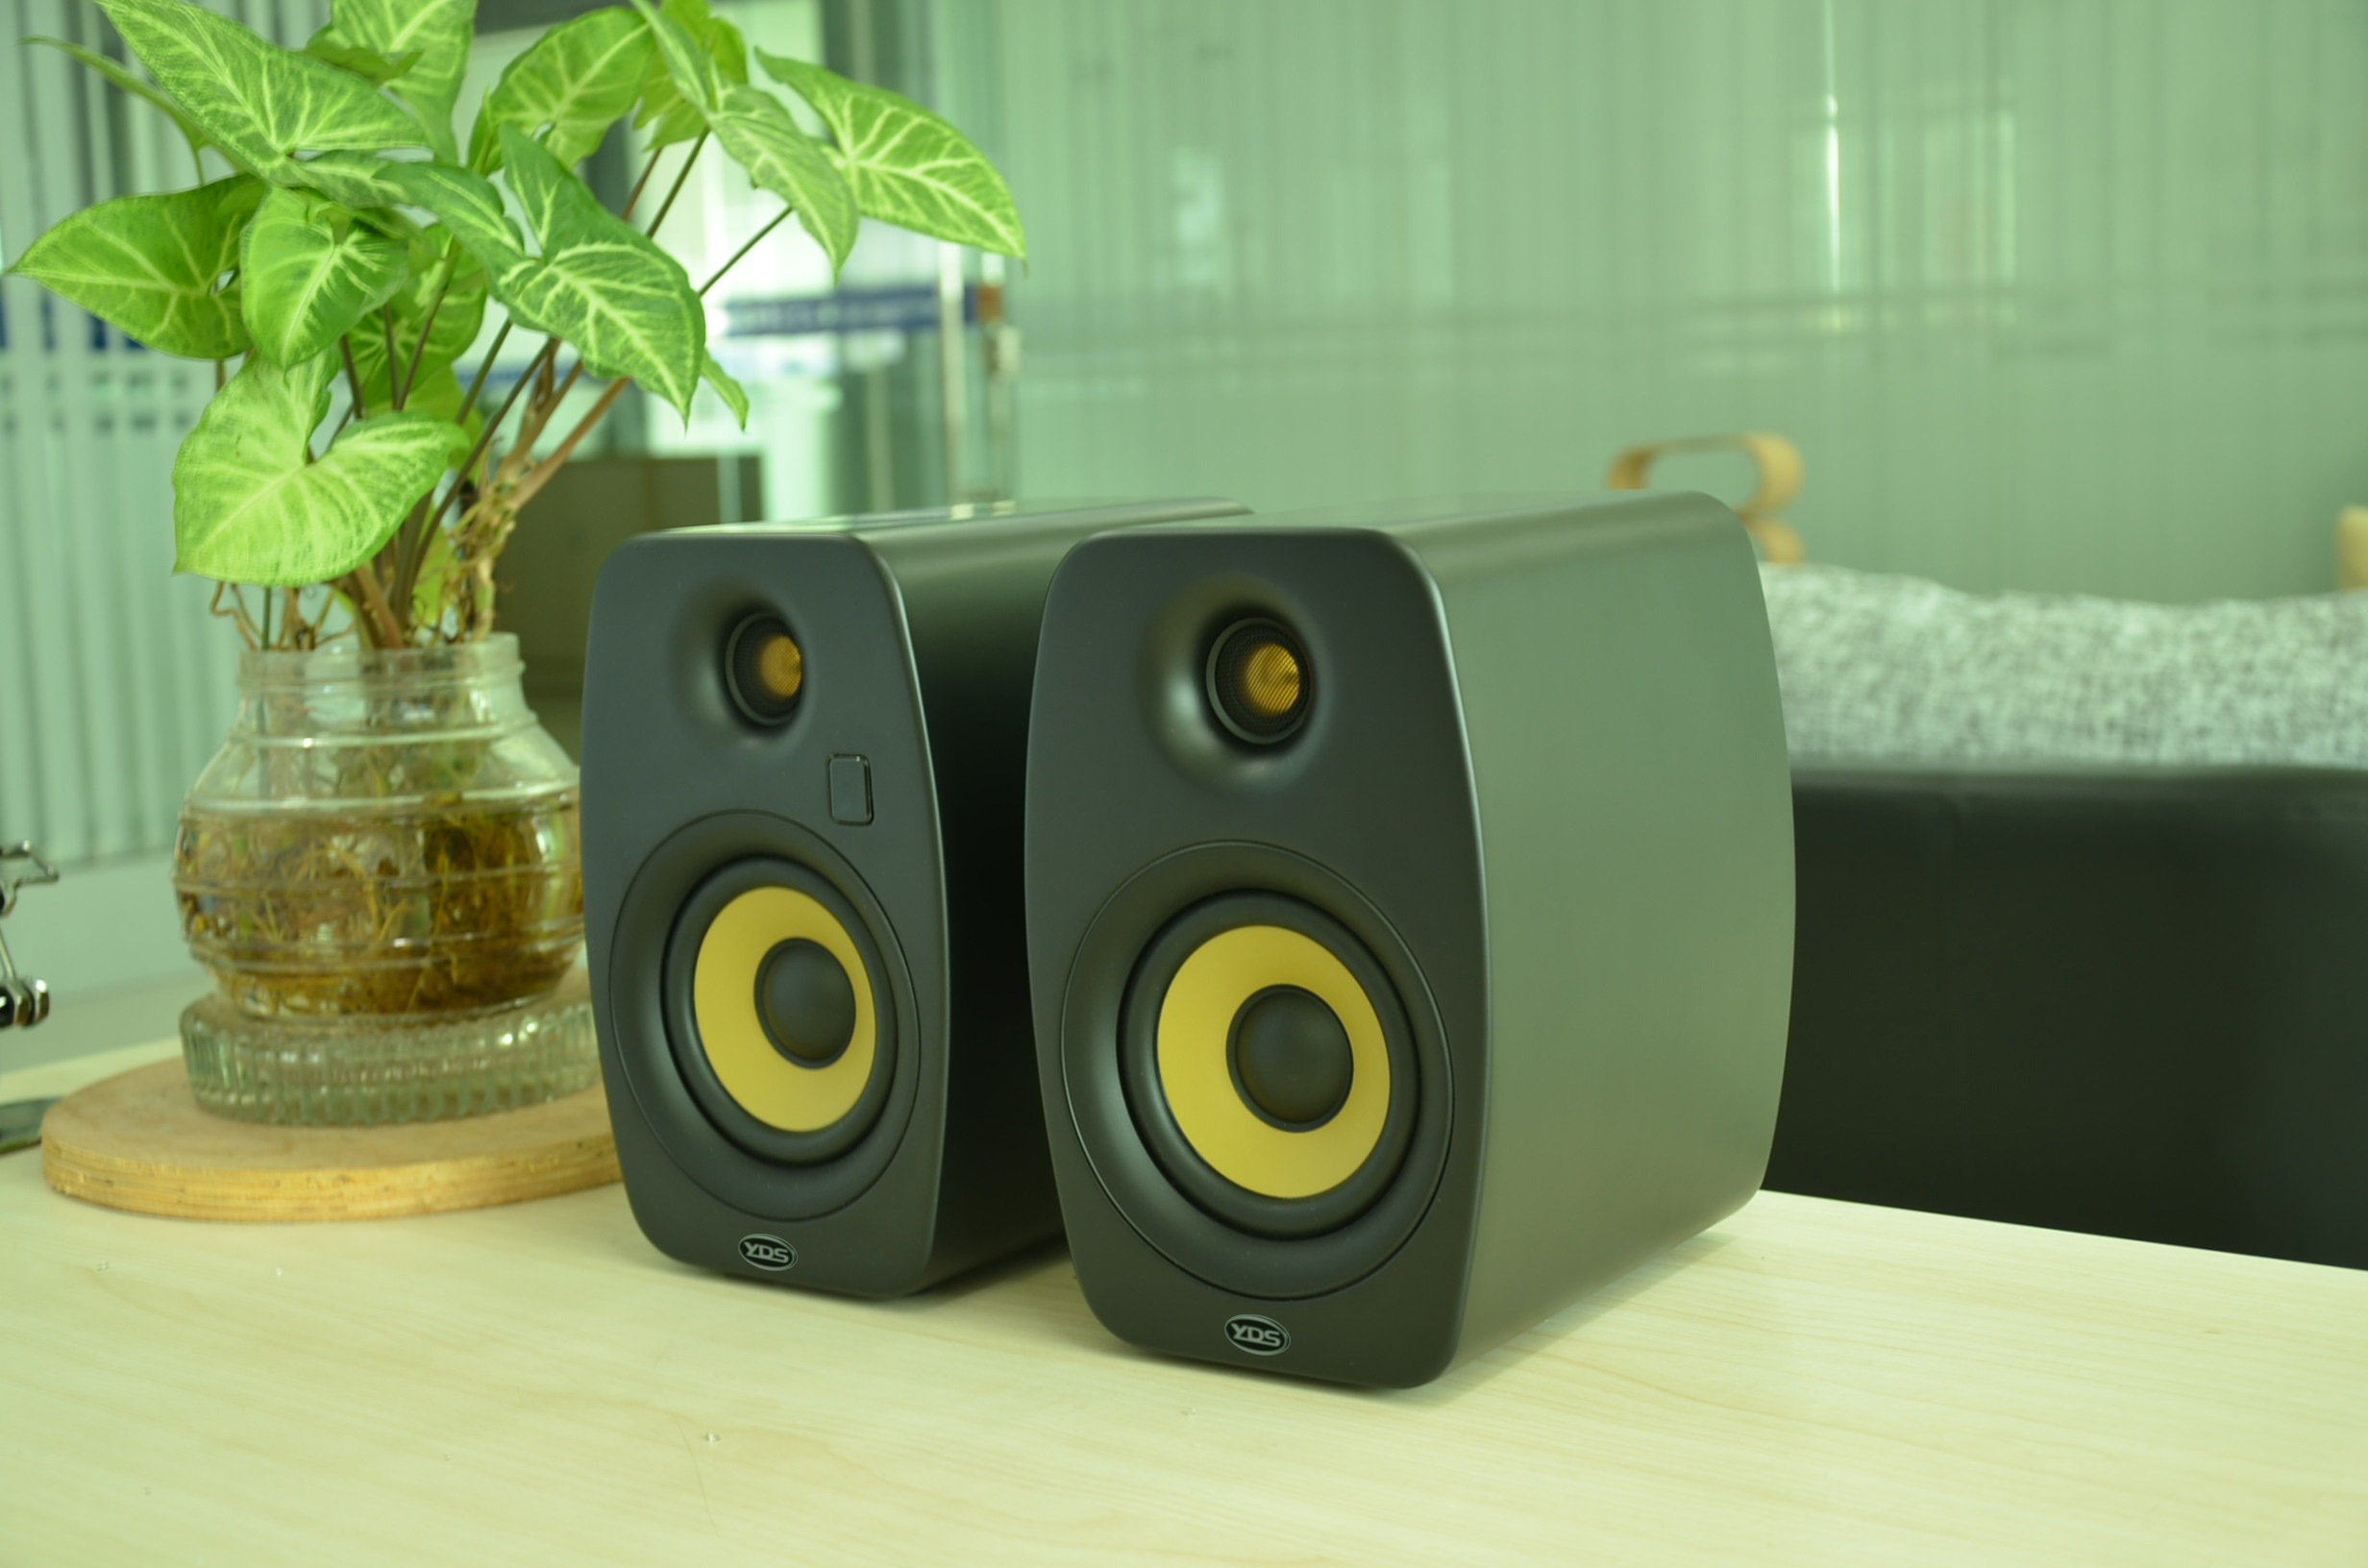 What is the importance of the portable speaker?